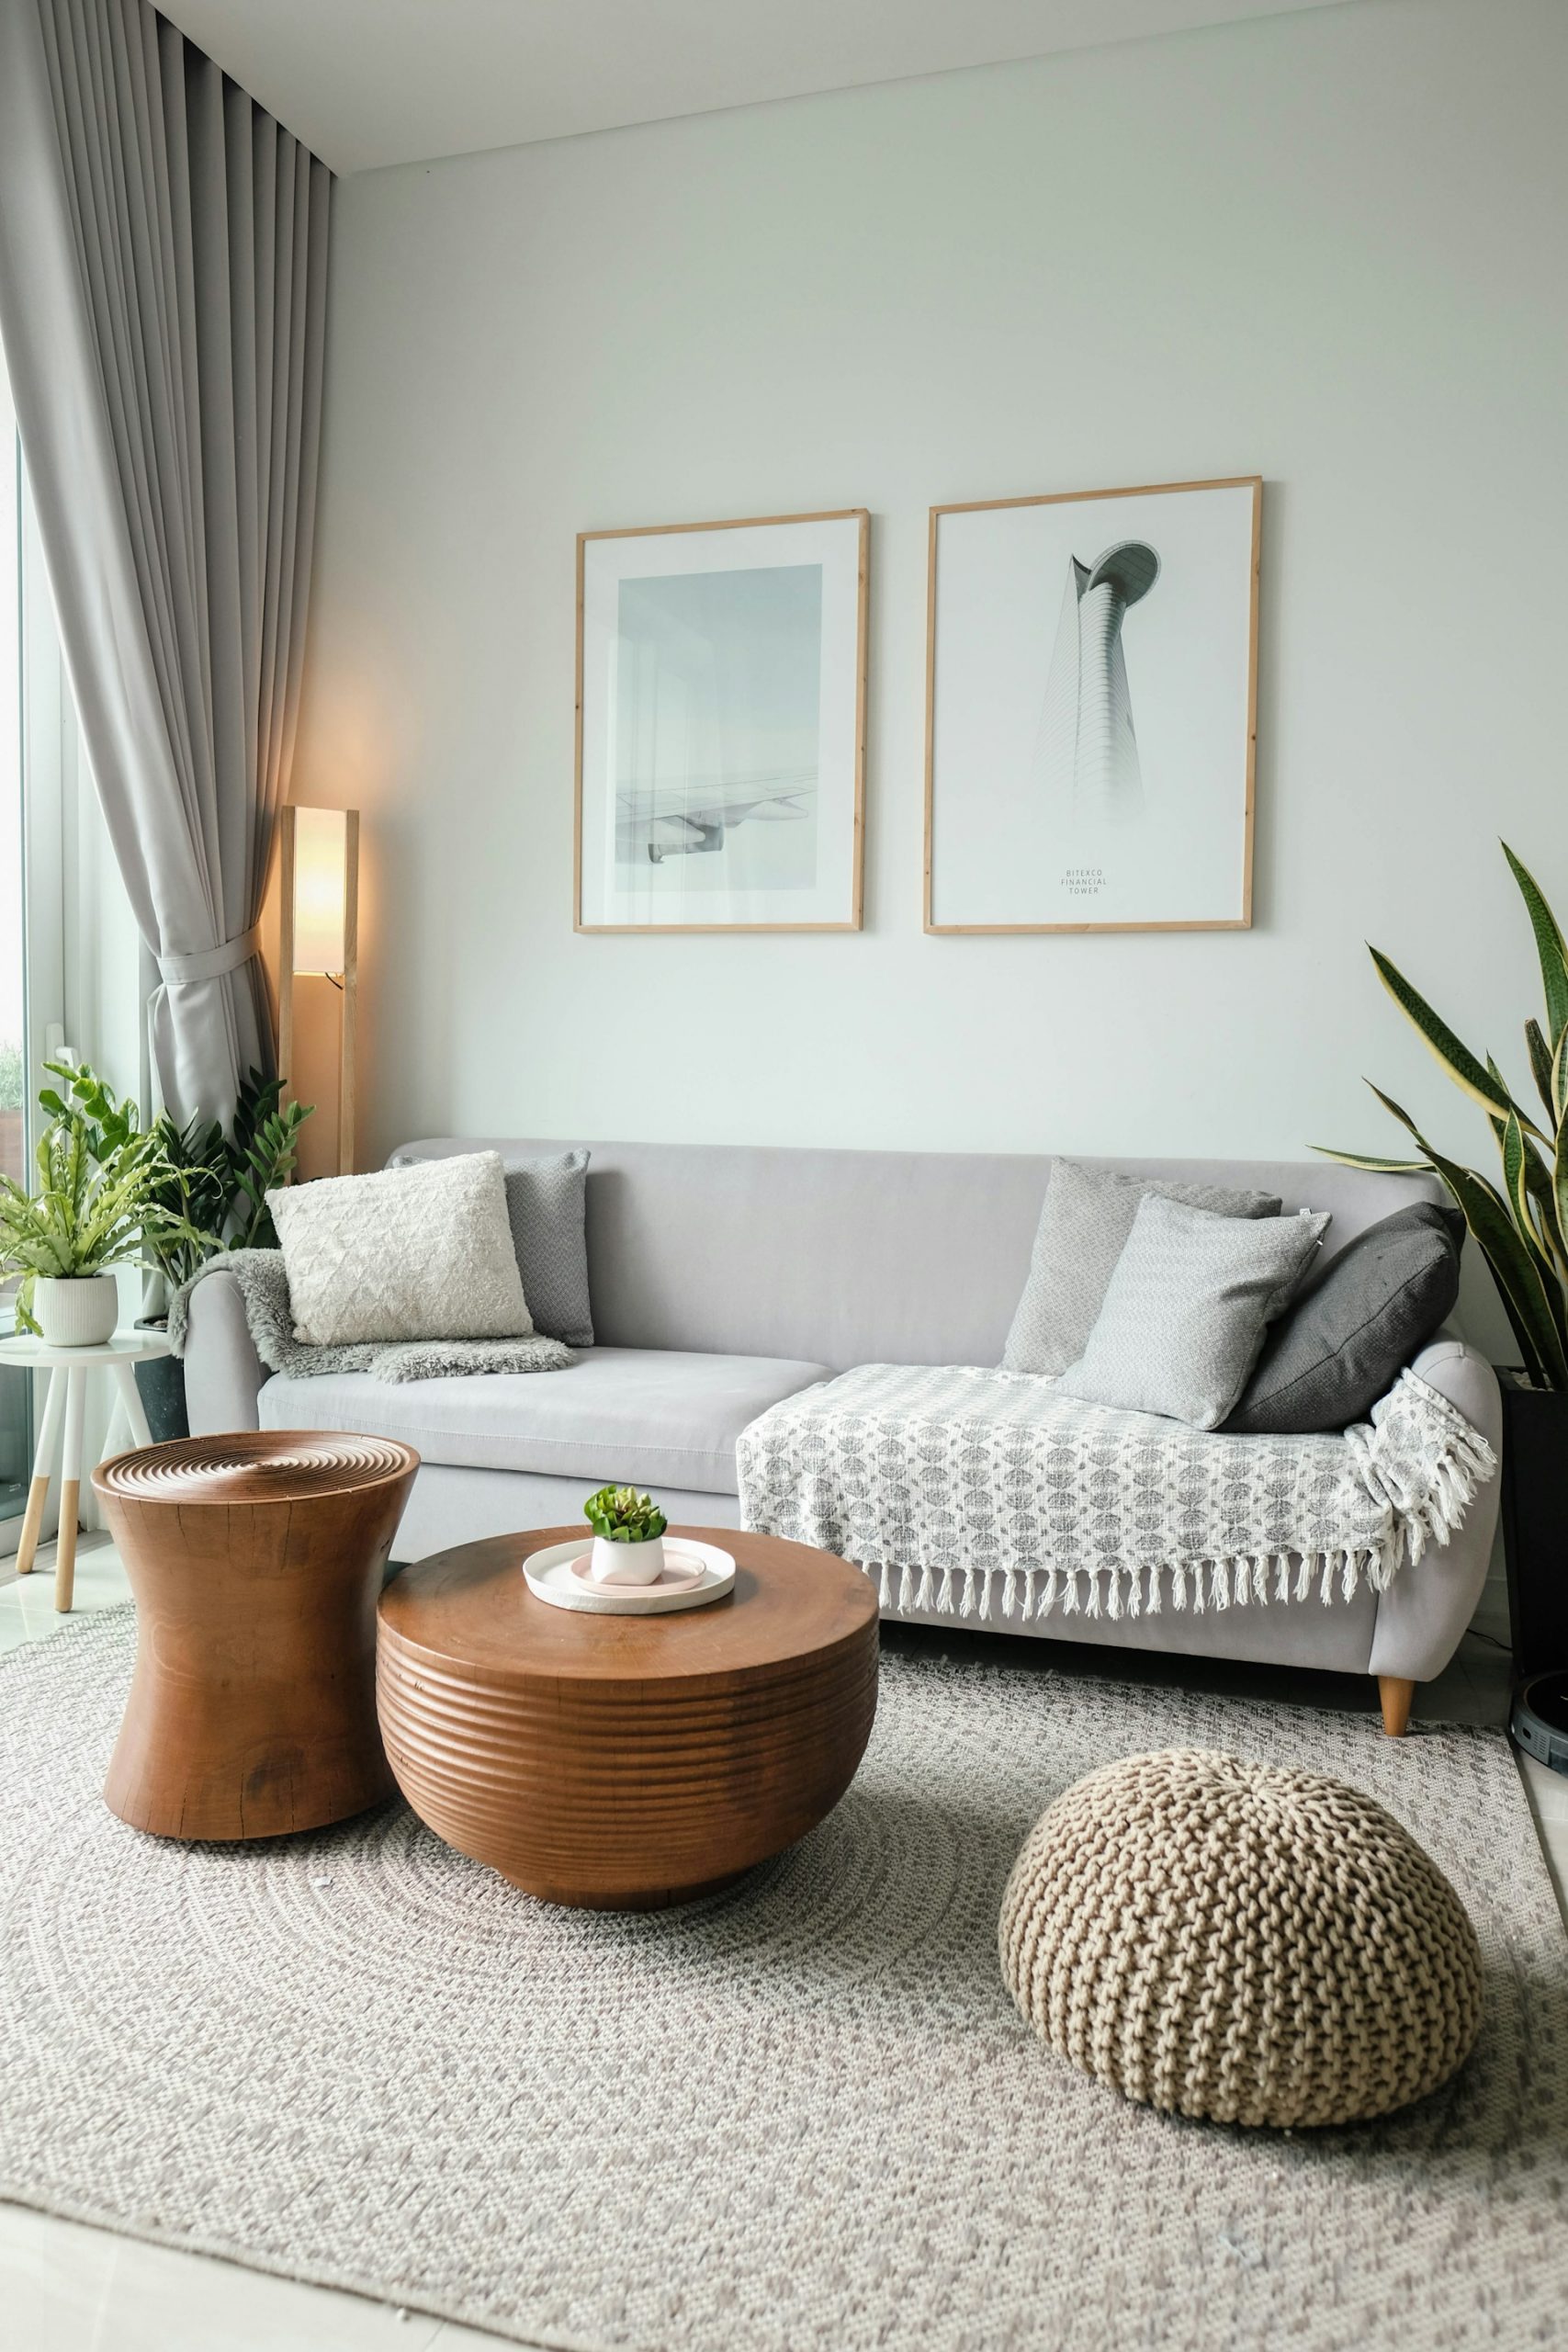 , 10 wellness design ideas to create a happy and healthy home